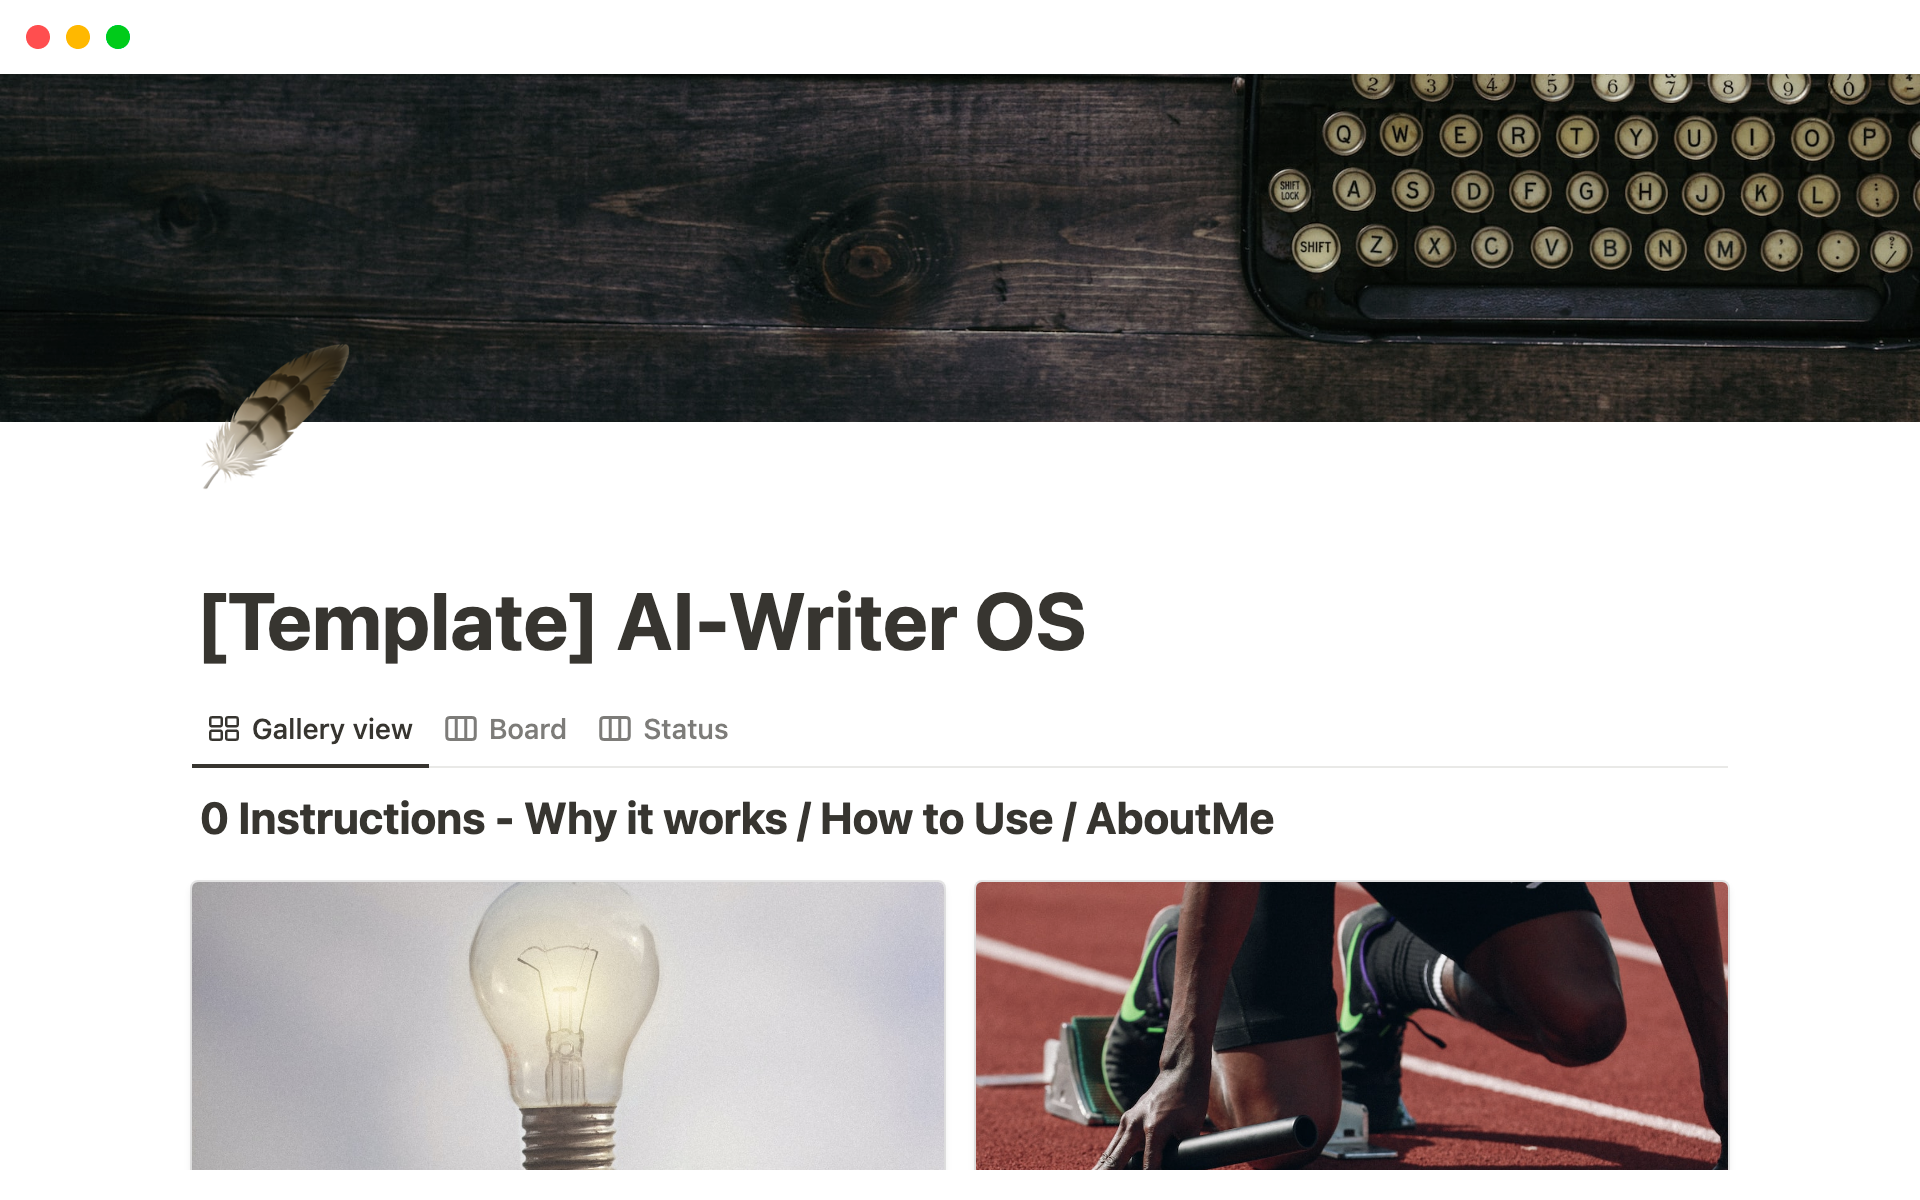 The AI-Writer OS is based on the COT Prompting engineering principle, which significantly improves the ability of large language models to perform complex reasoning. 